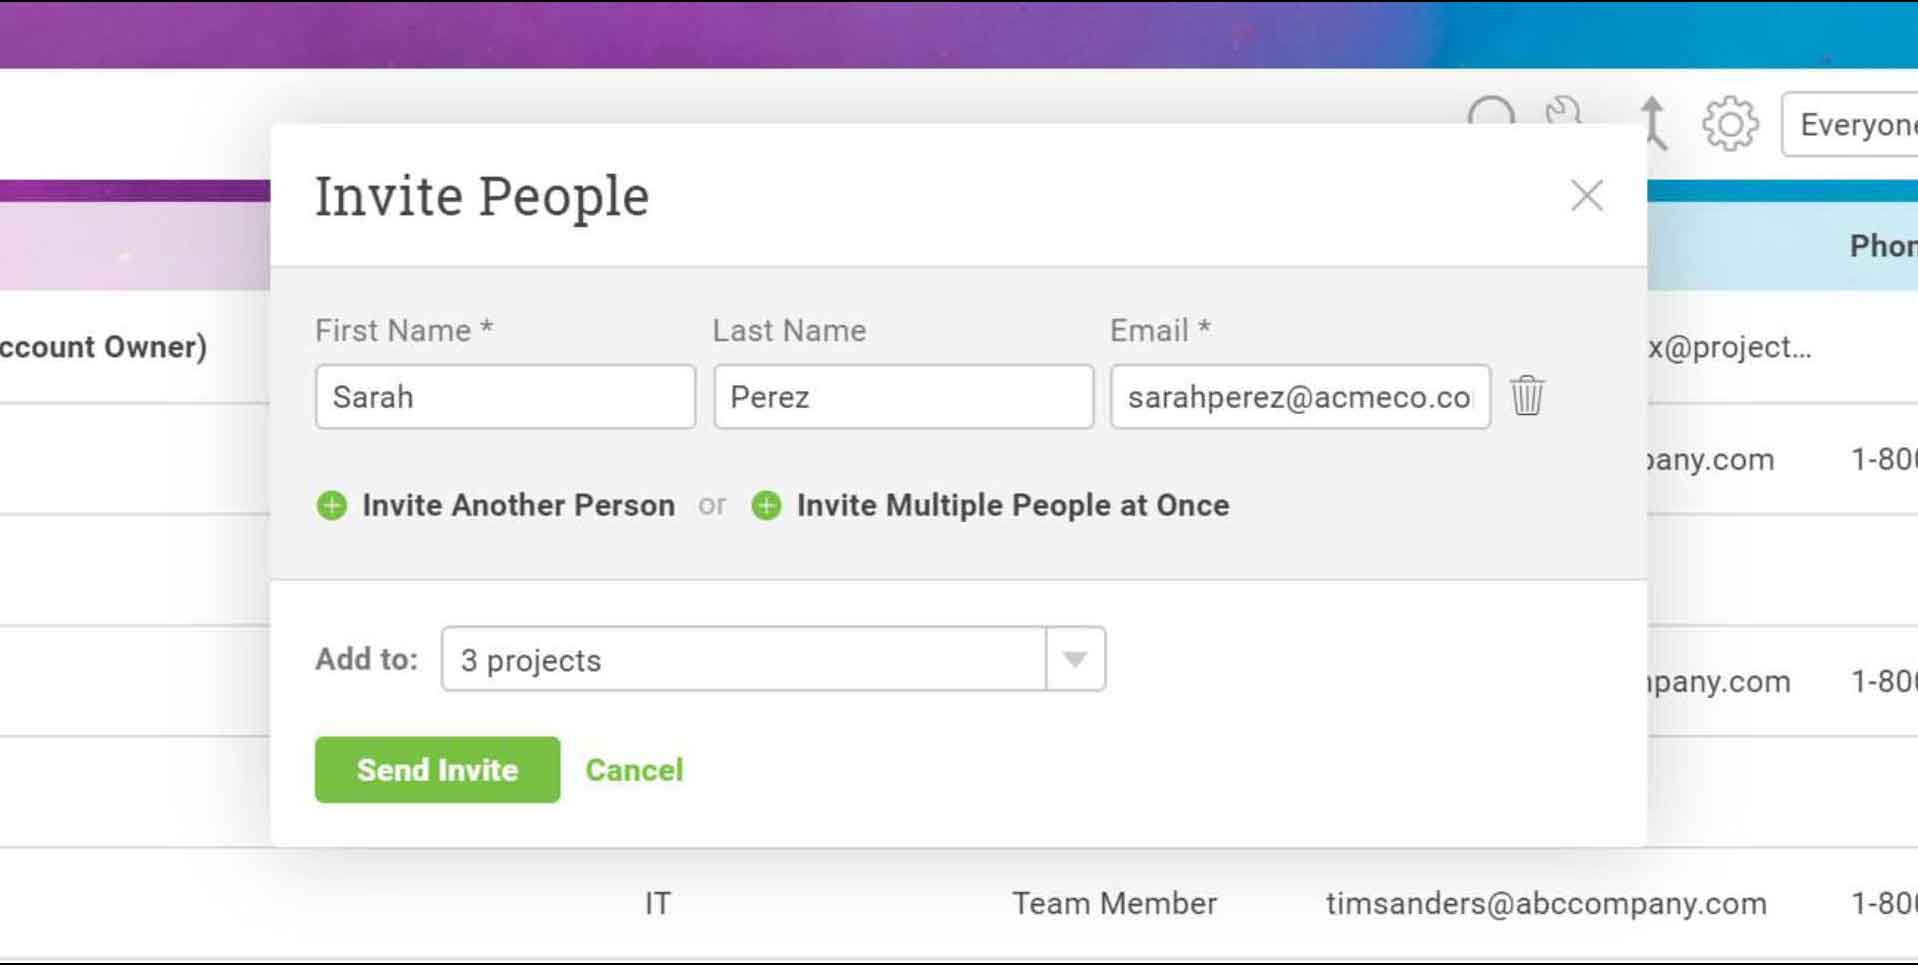 A screenshot of ProjectManager.com’s “Manage Users” interface, where people can be invited via email to the software.